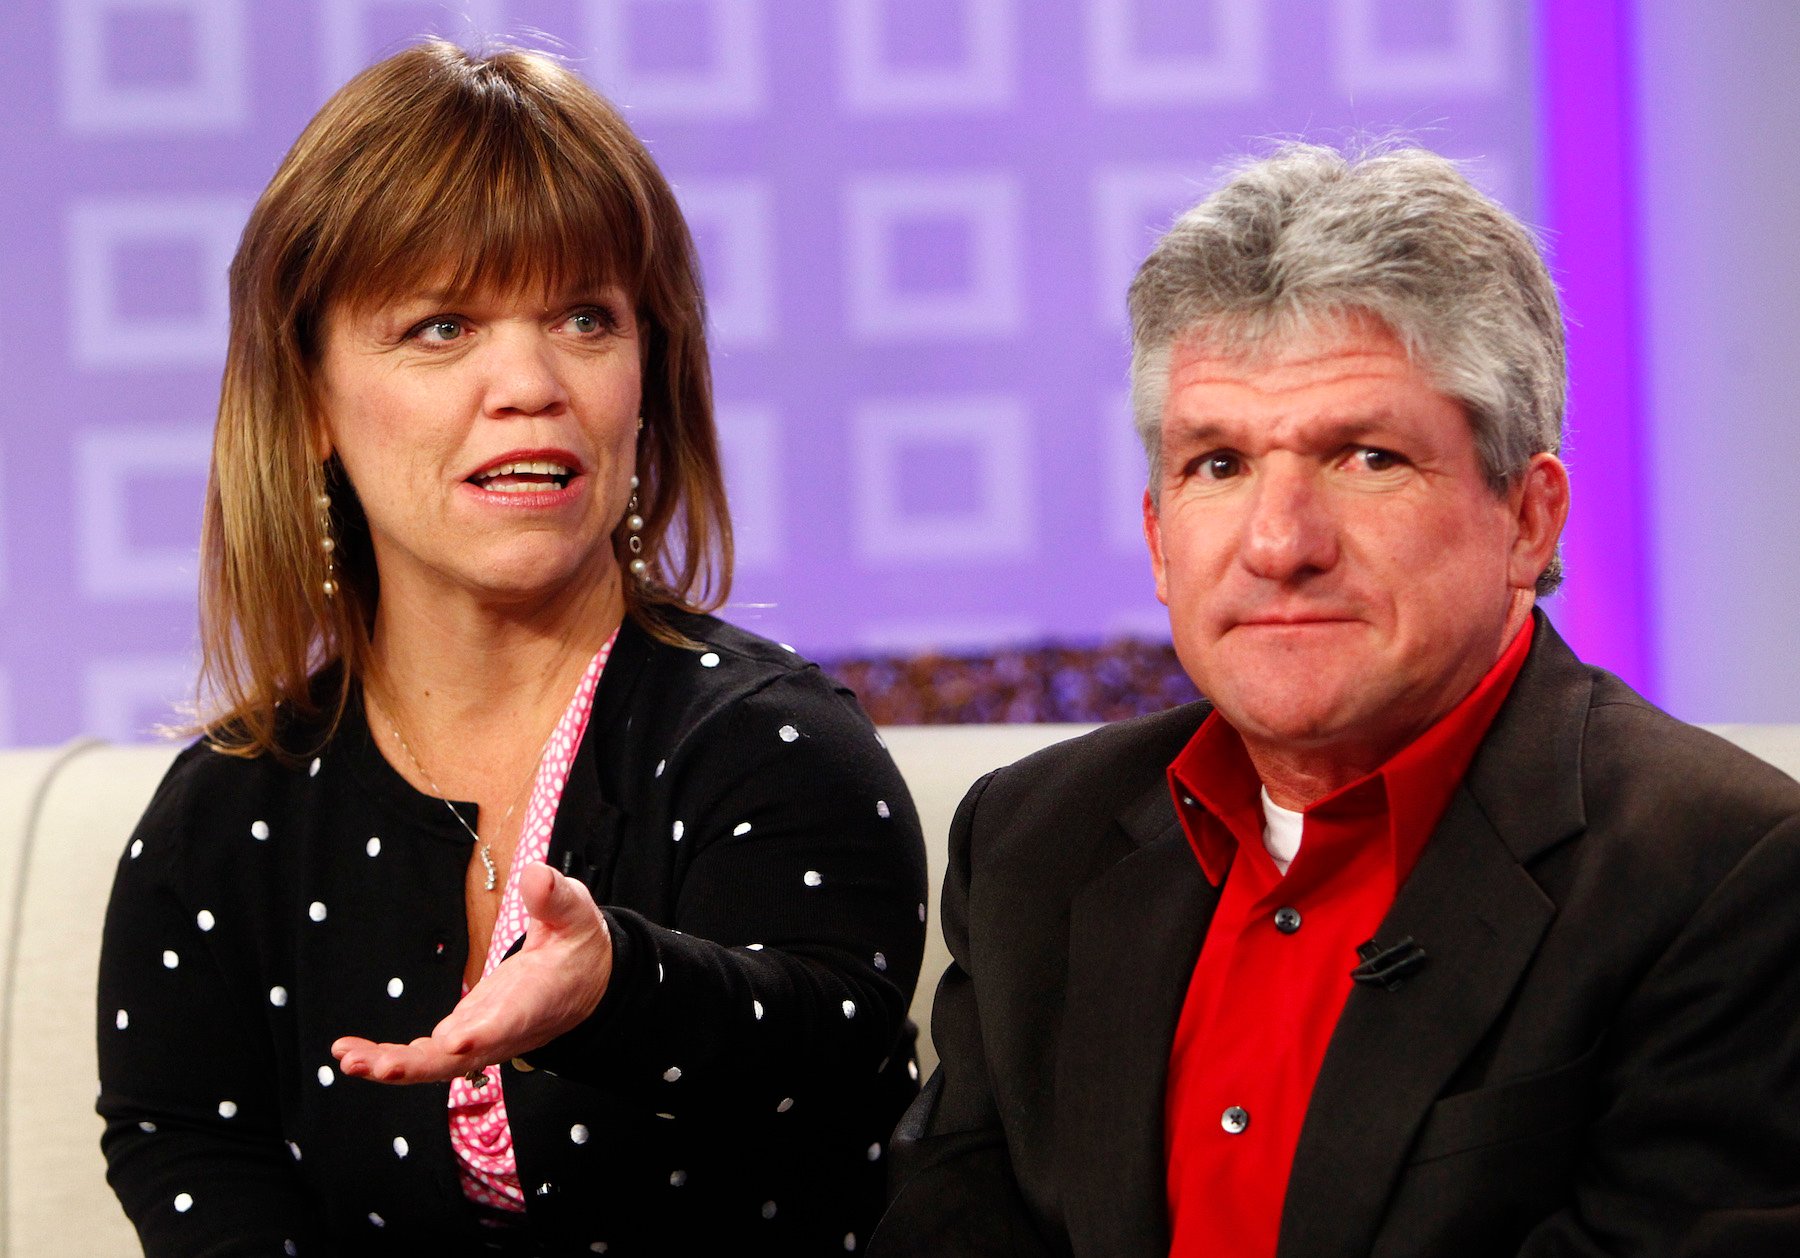 Amy Roloff and Matt Roloff from 'Little People, Big World' sitting next to each other and speaking on a talk show